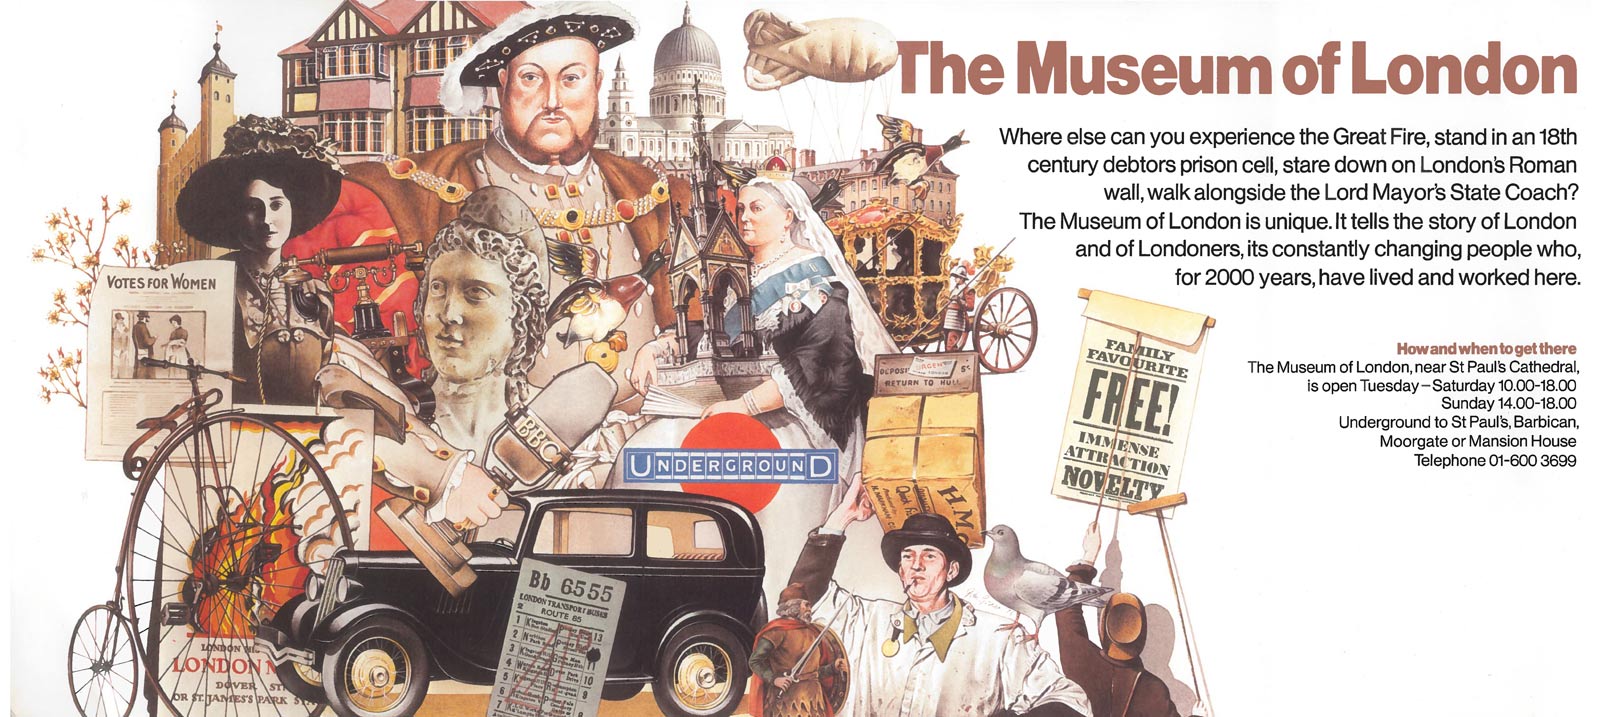 A poster for the Museum of London from 1976.